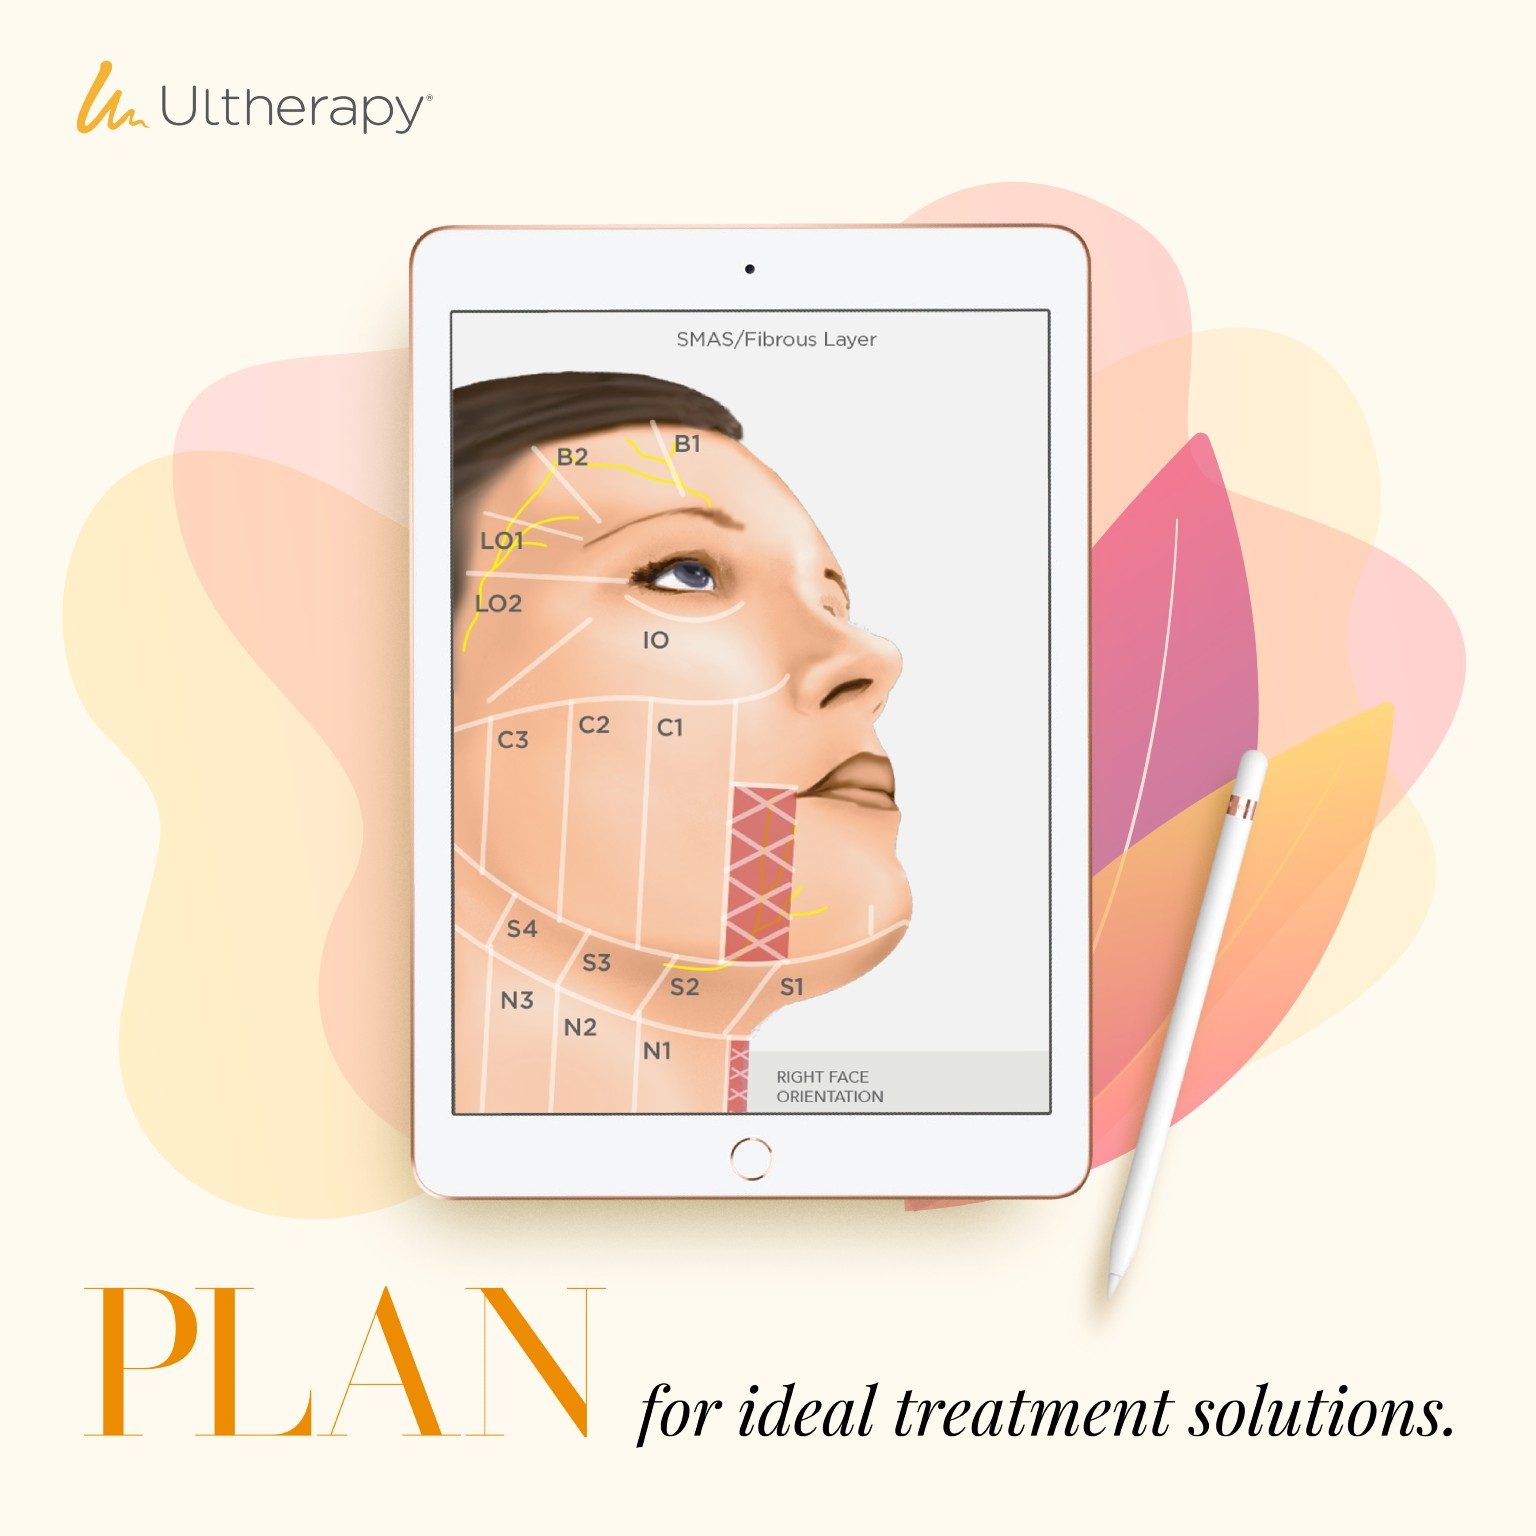 Ultherapy Treatment Plan